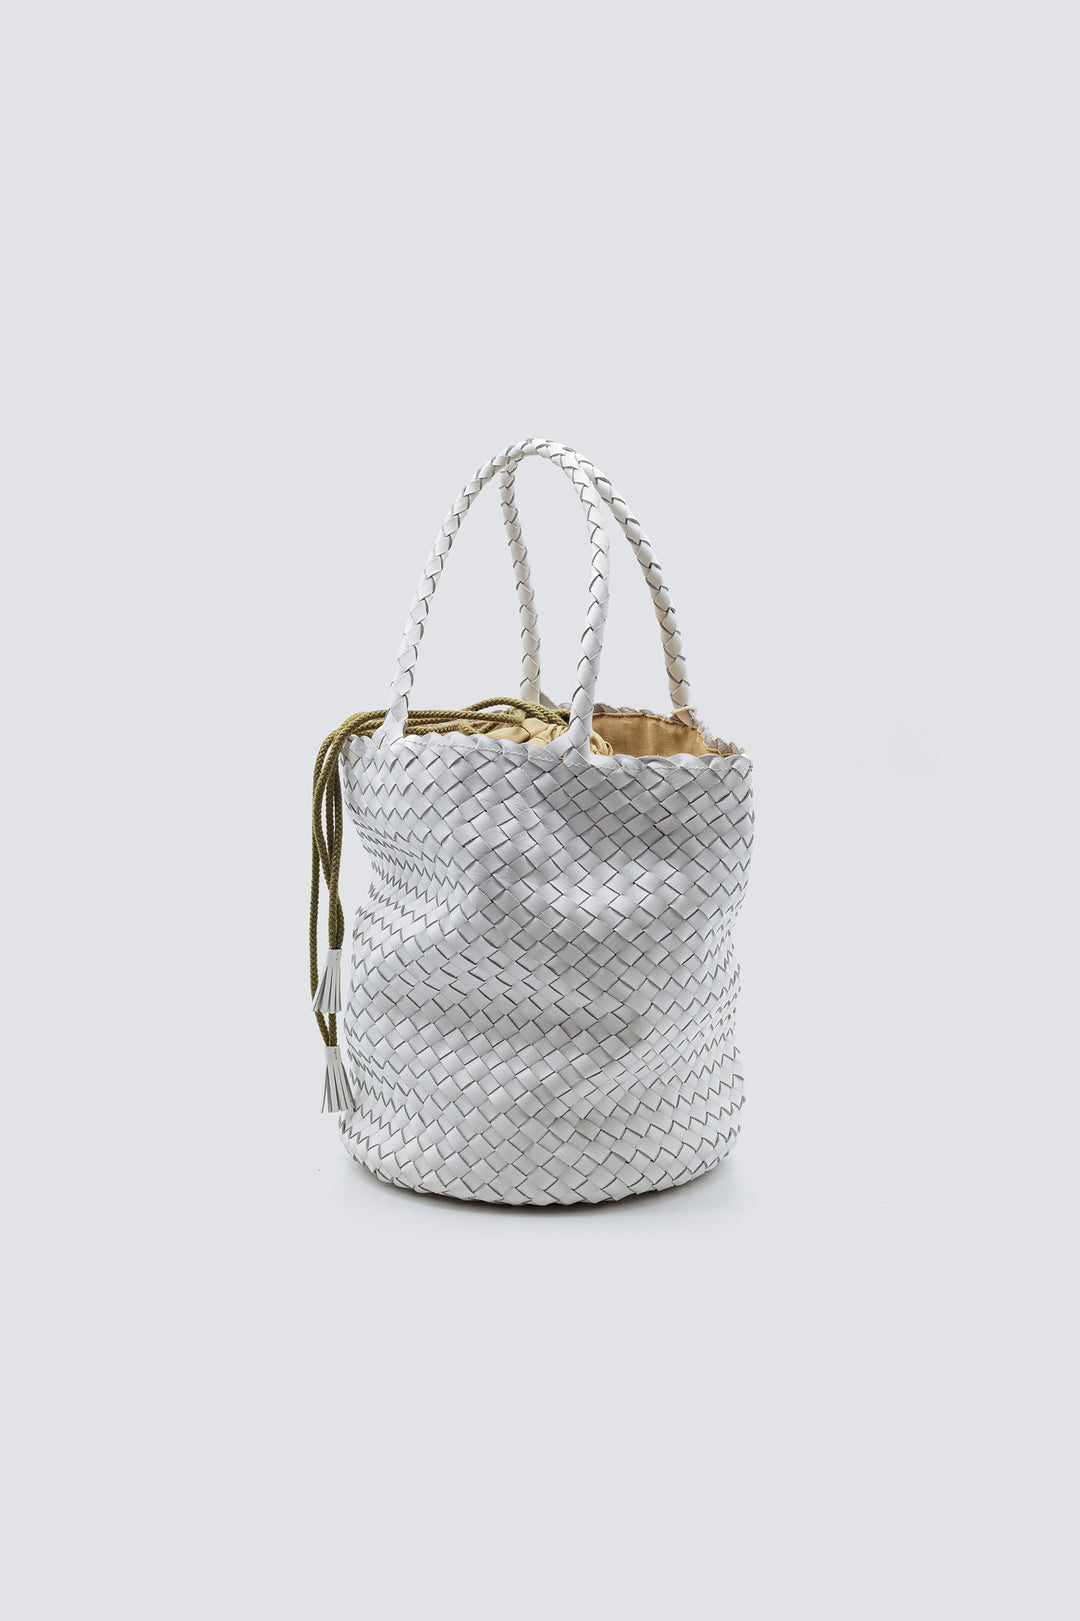 Dragon Diffusion woven leather bag handmade - Jackie Bucket Lining White